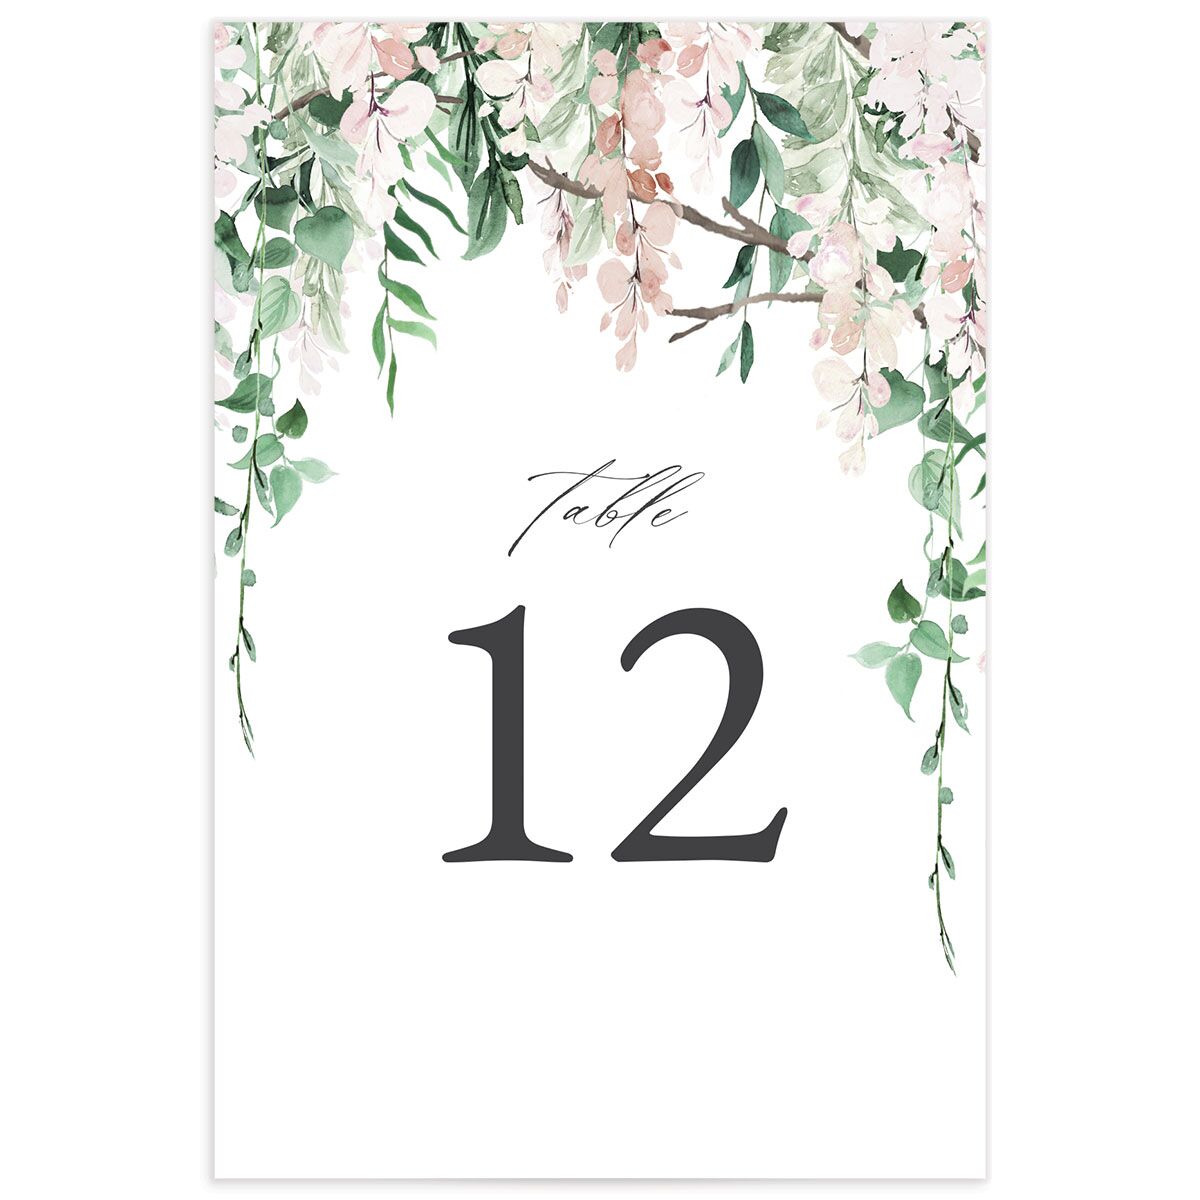 Enchanting Wisteria Table Numbers back in pink